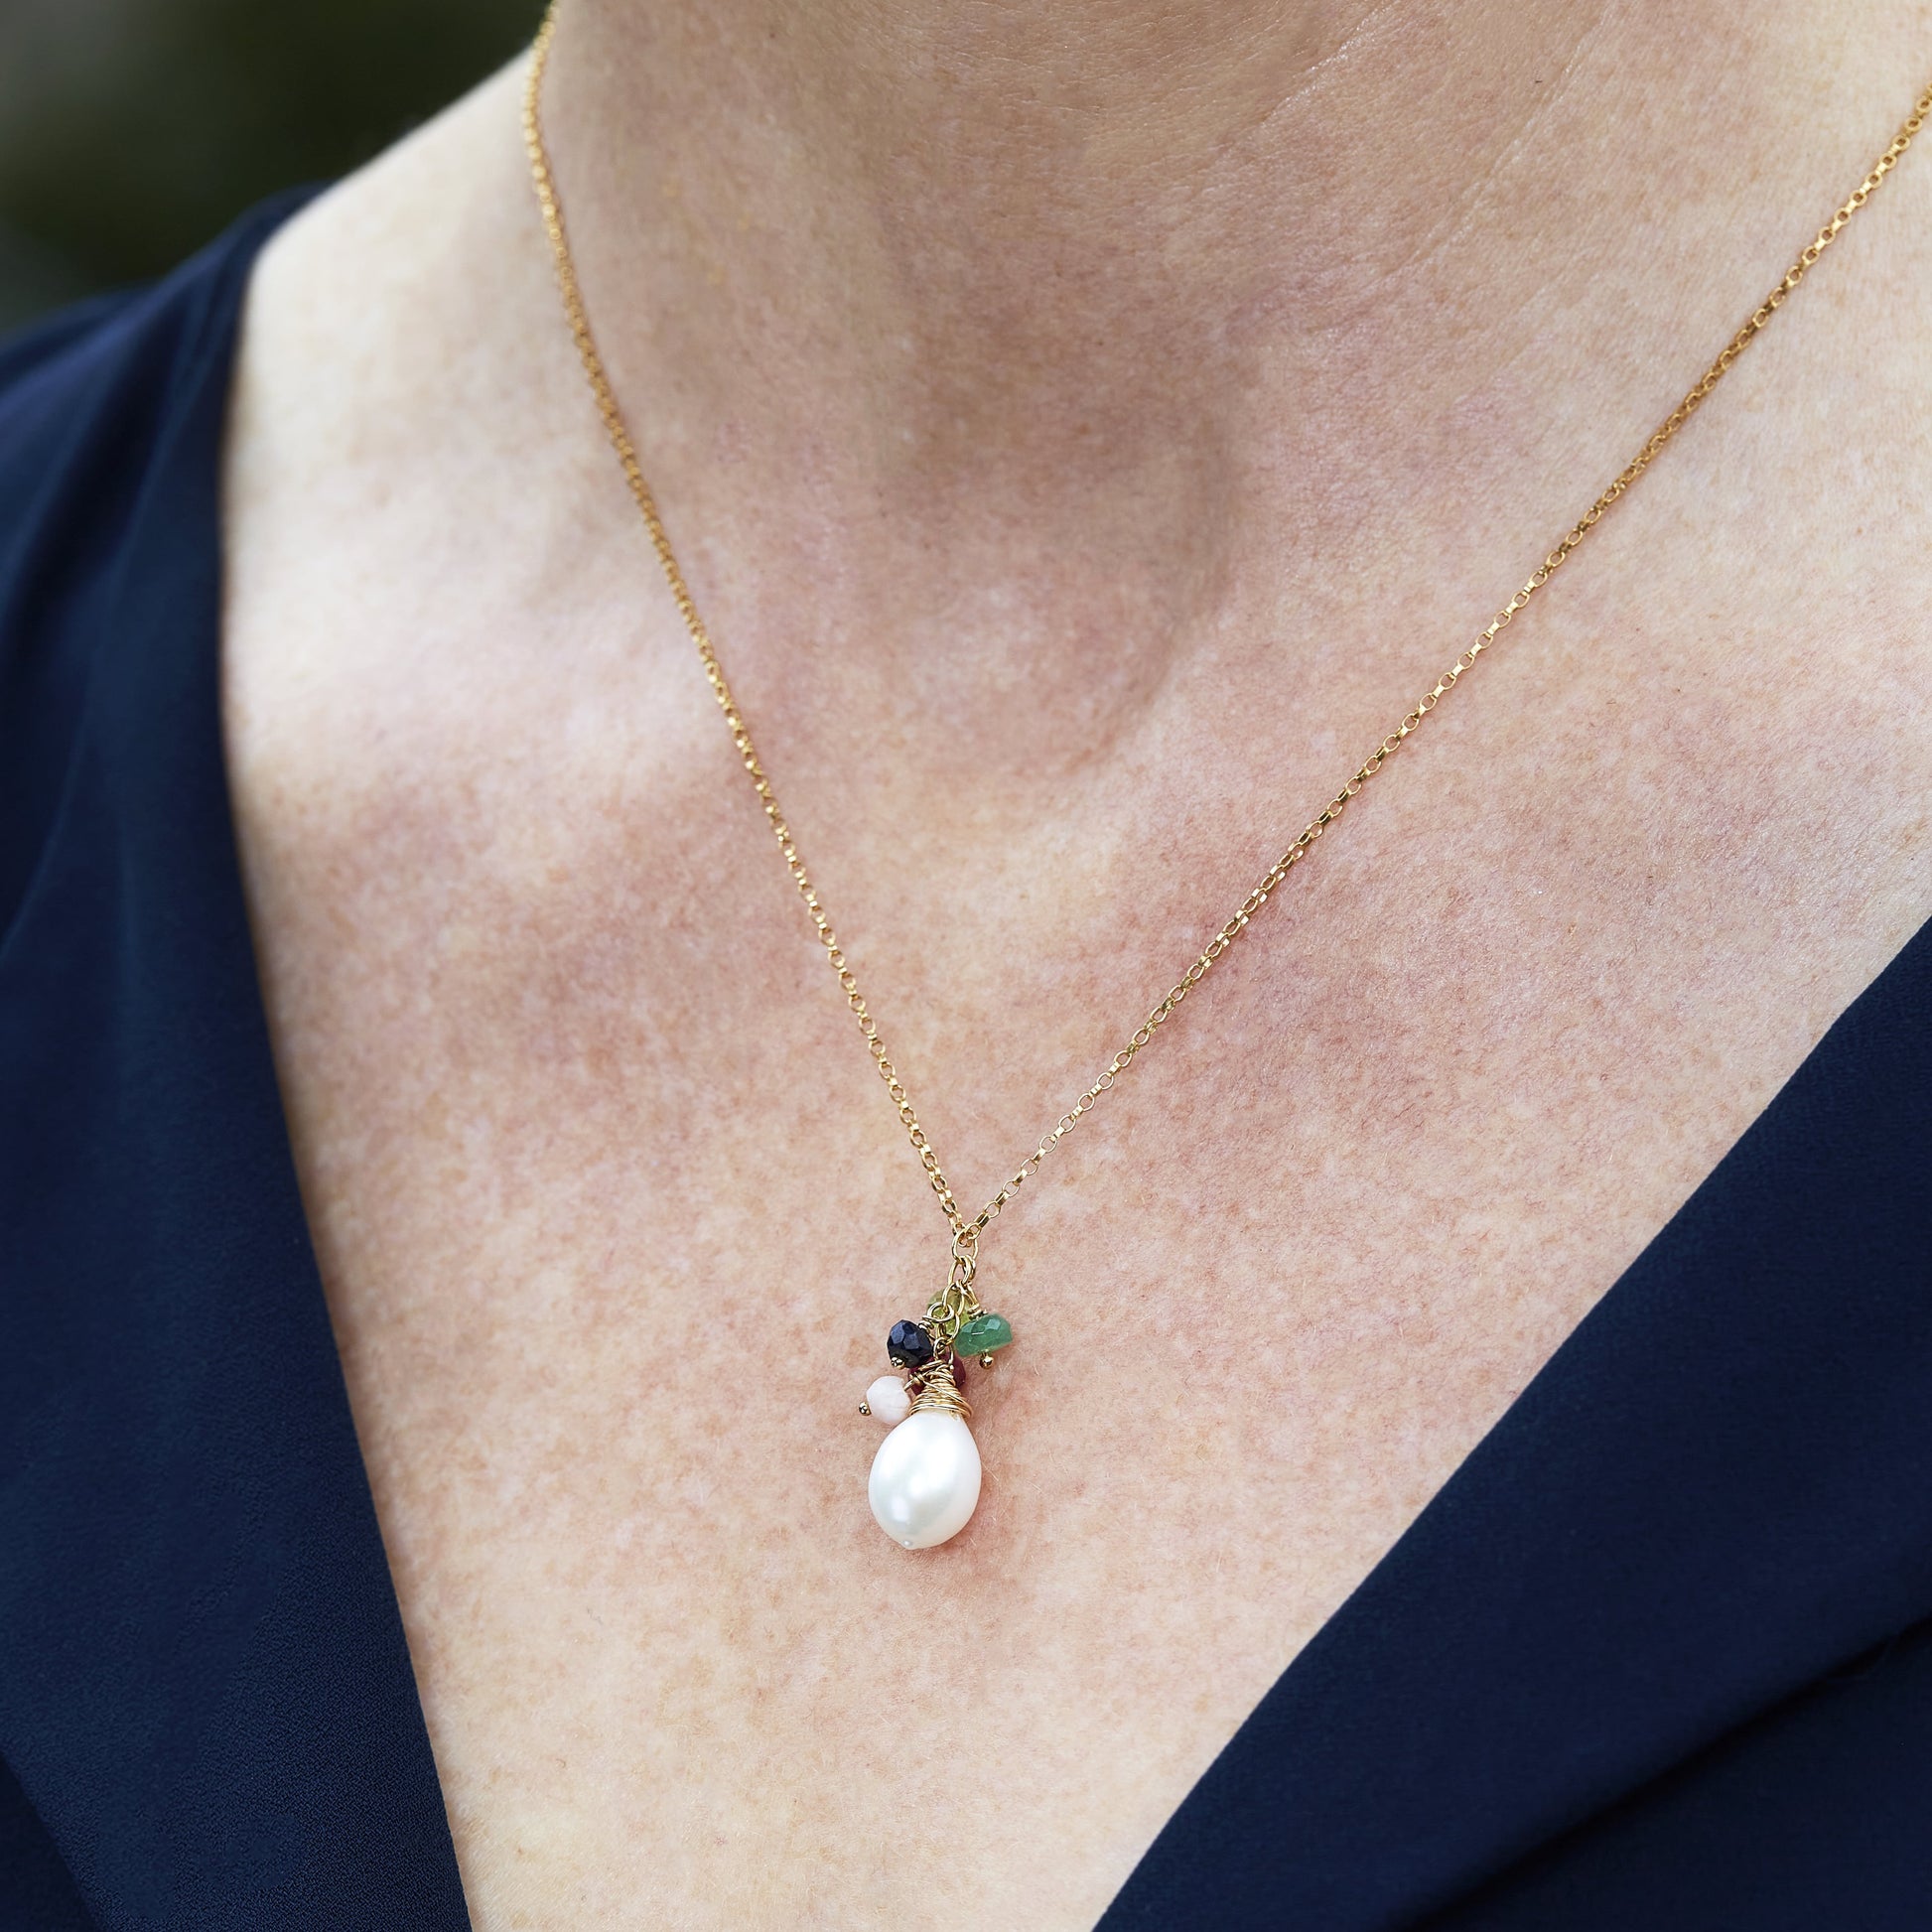 Christmas Gift for Nan - Family Birthstone Necklace with Freshwater Pearl